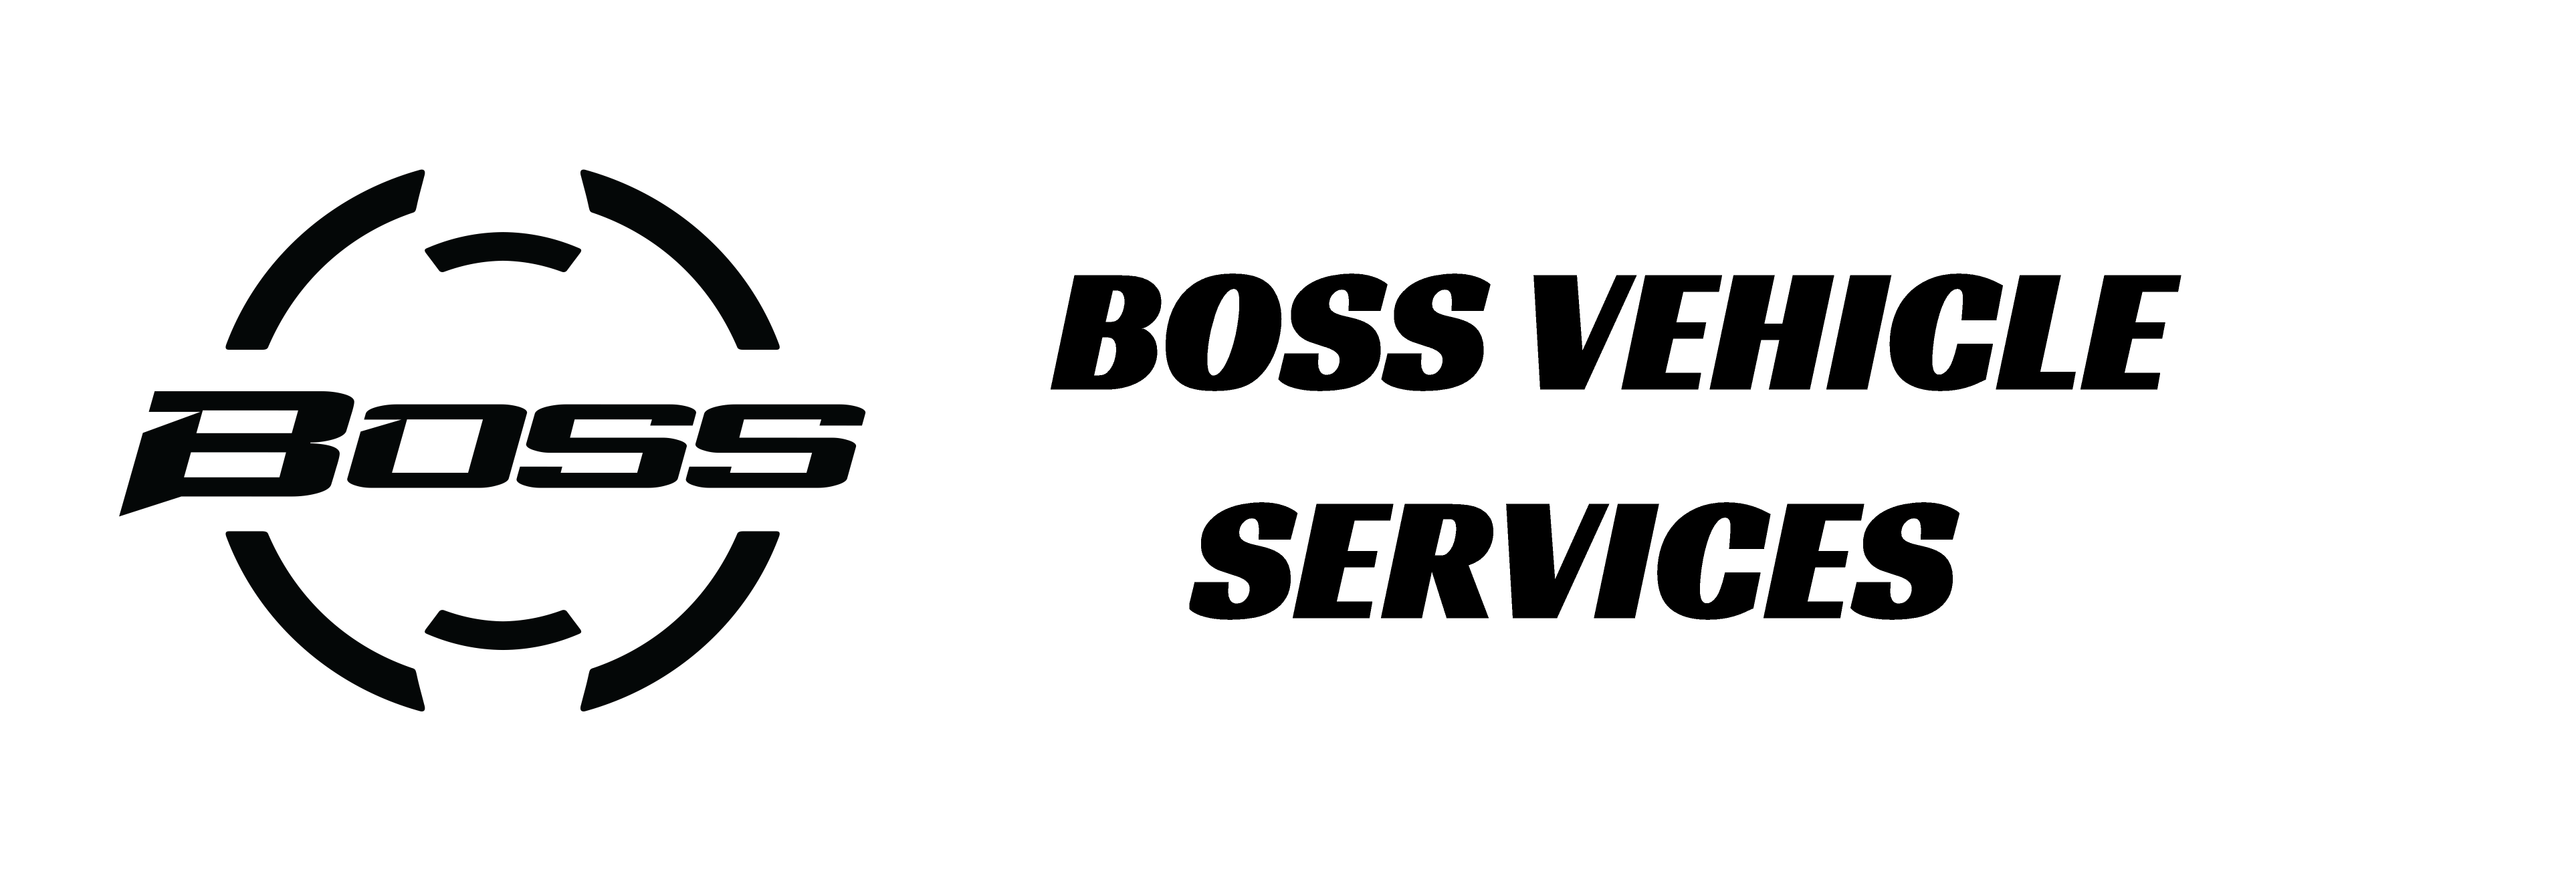 Boss Vehicle Services